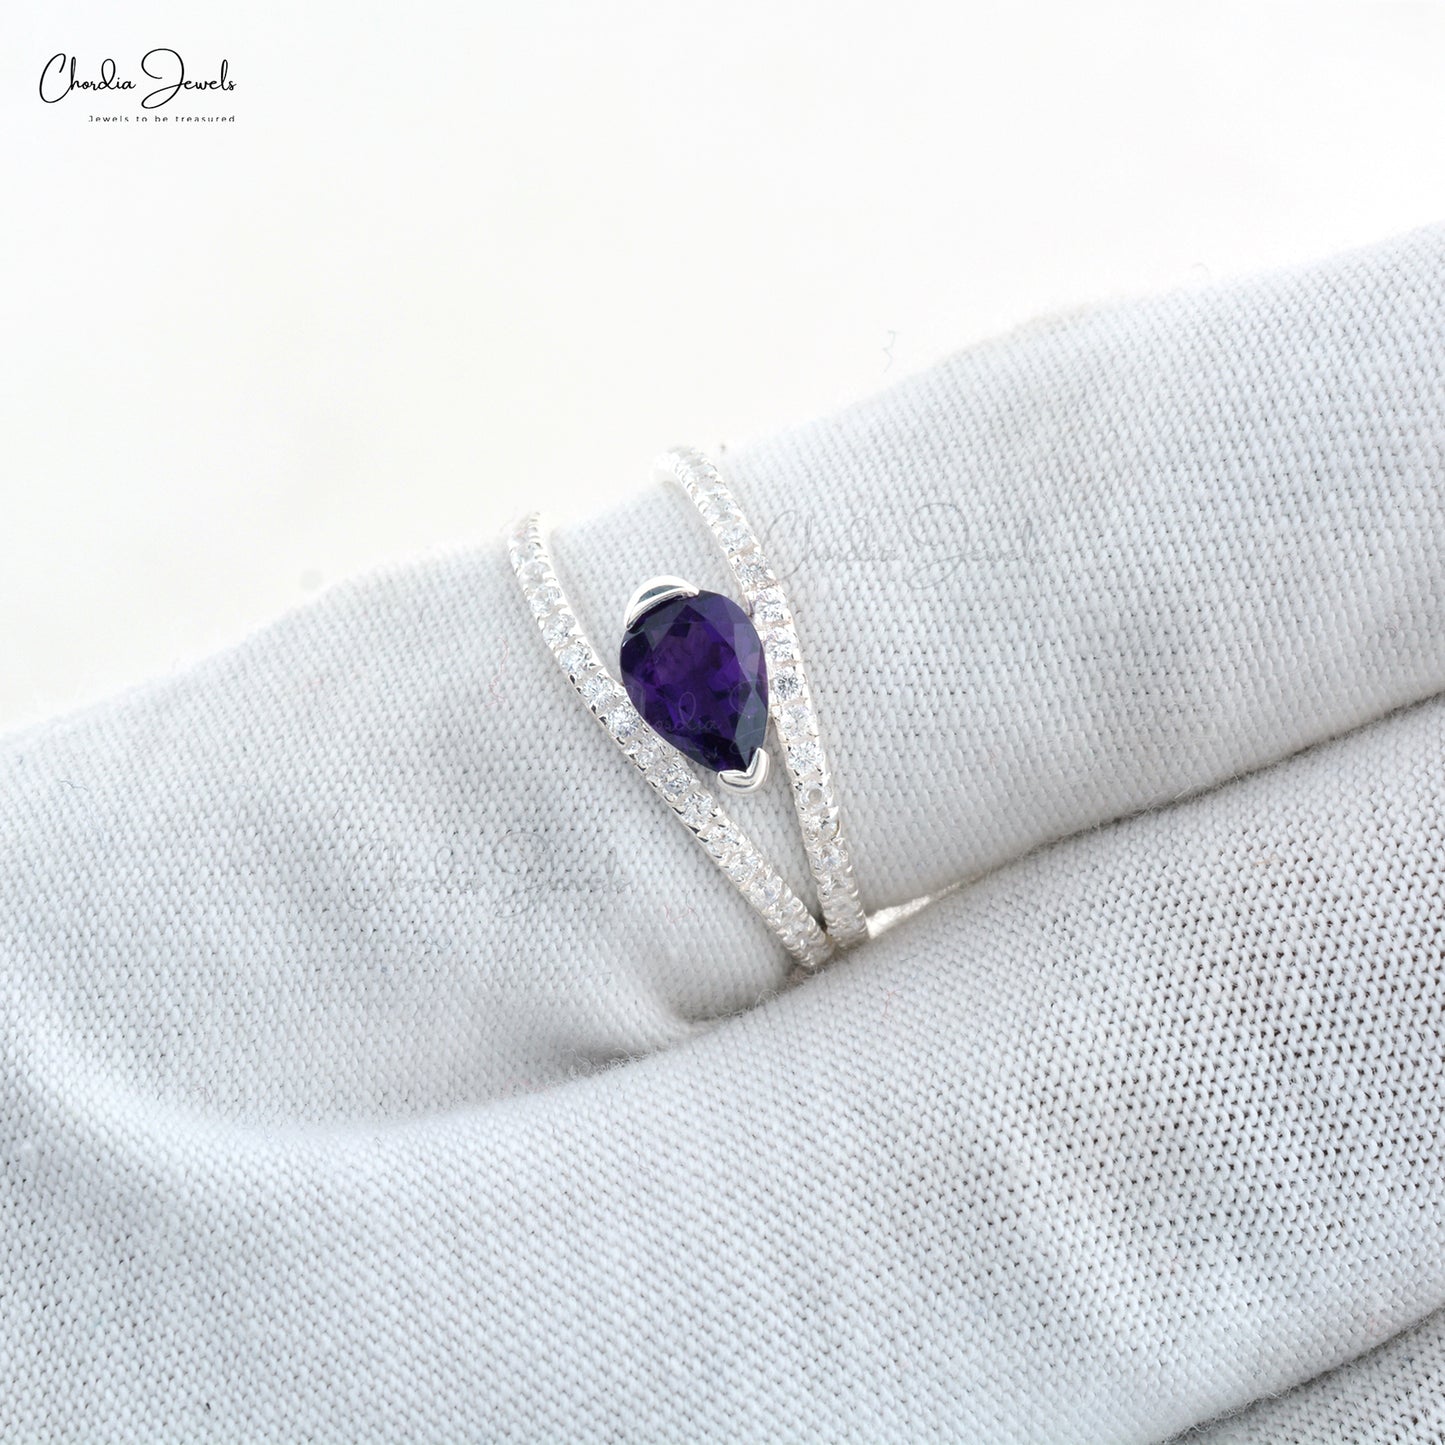 High-Quality 925 Sterling Silver 7x5mm Pear Amethyst Split Shank Ring For Girls Fashion Jewelry At Offer Price